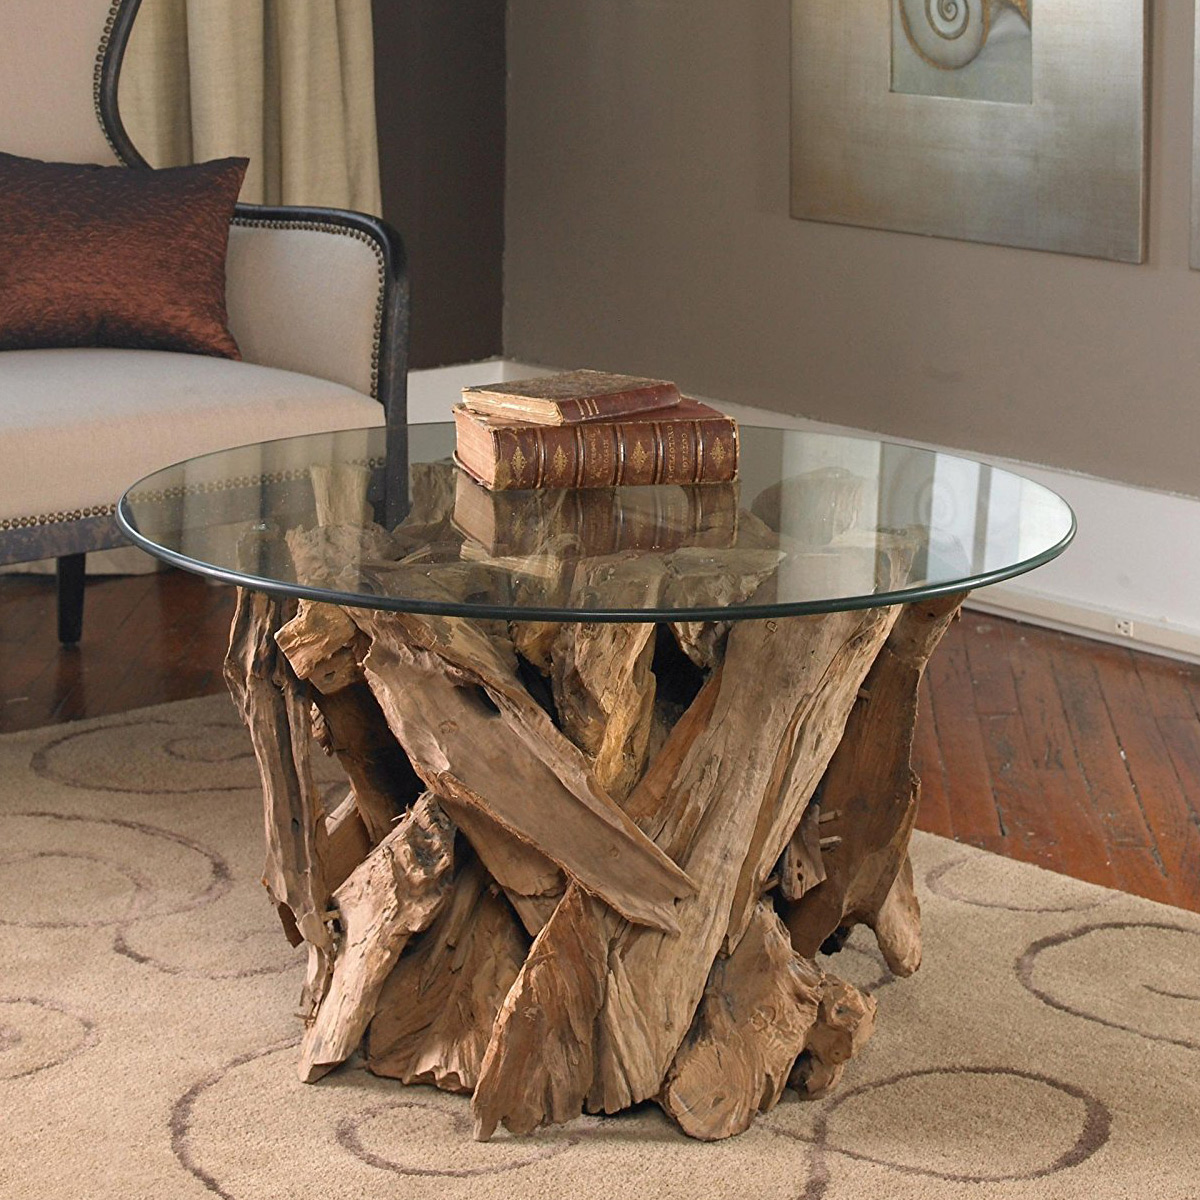 Teak Dining Table With Glass Top: A Blend Of Traditional And Modern